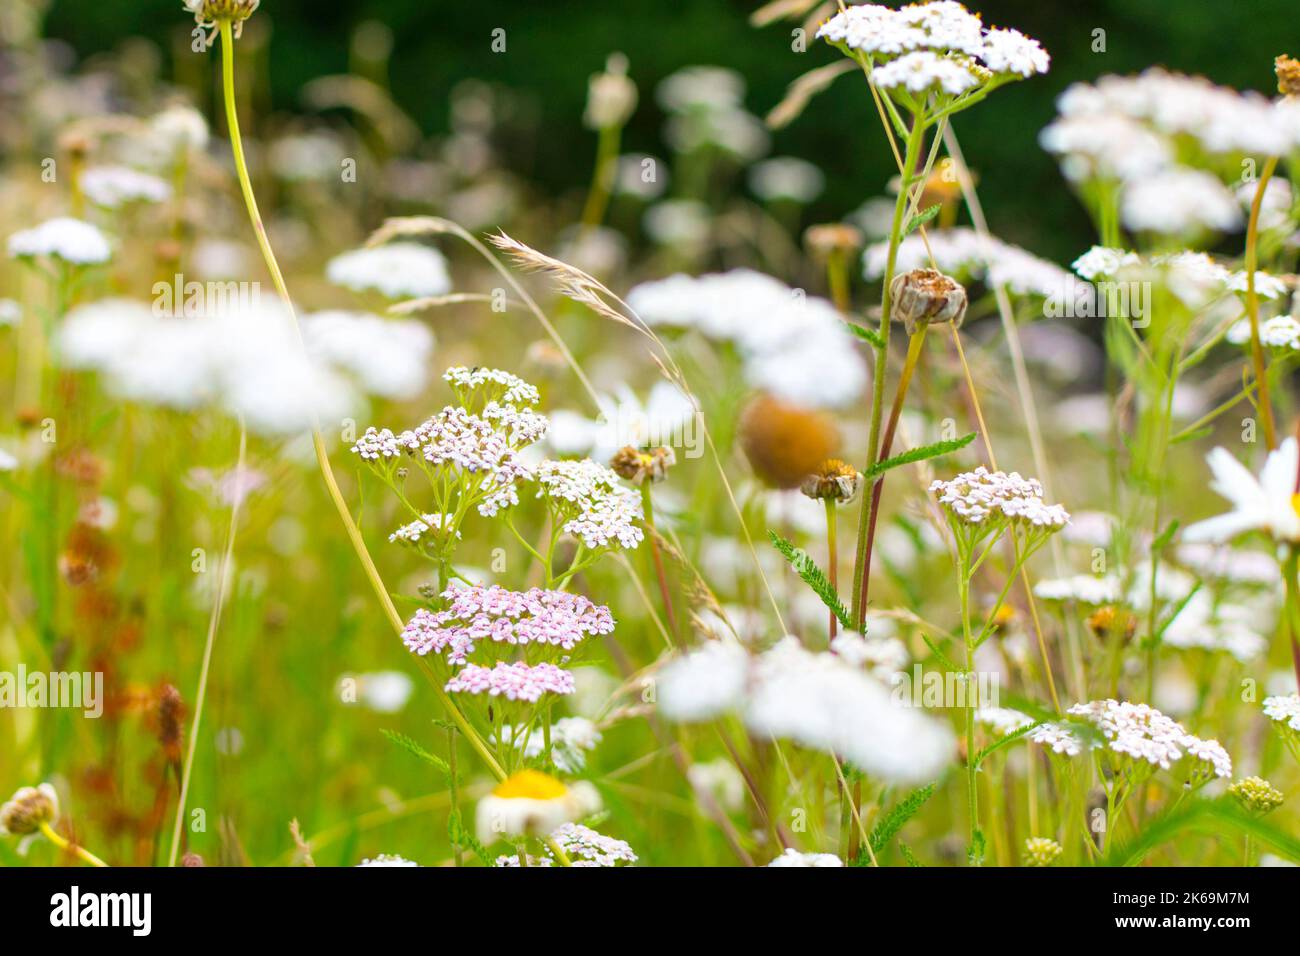 View of a flowering meadow with the pink and white flowers of yarrow (Achillea millefolium) and dried meadow daisy. The flowers are cropped and sharp Stock Photo